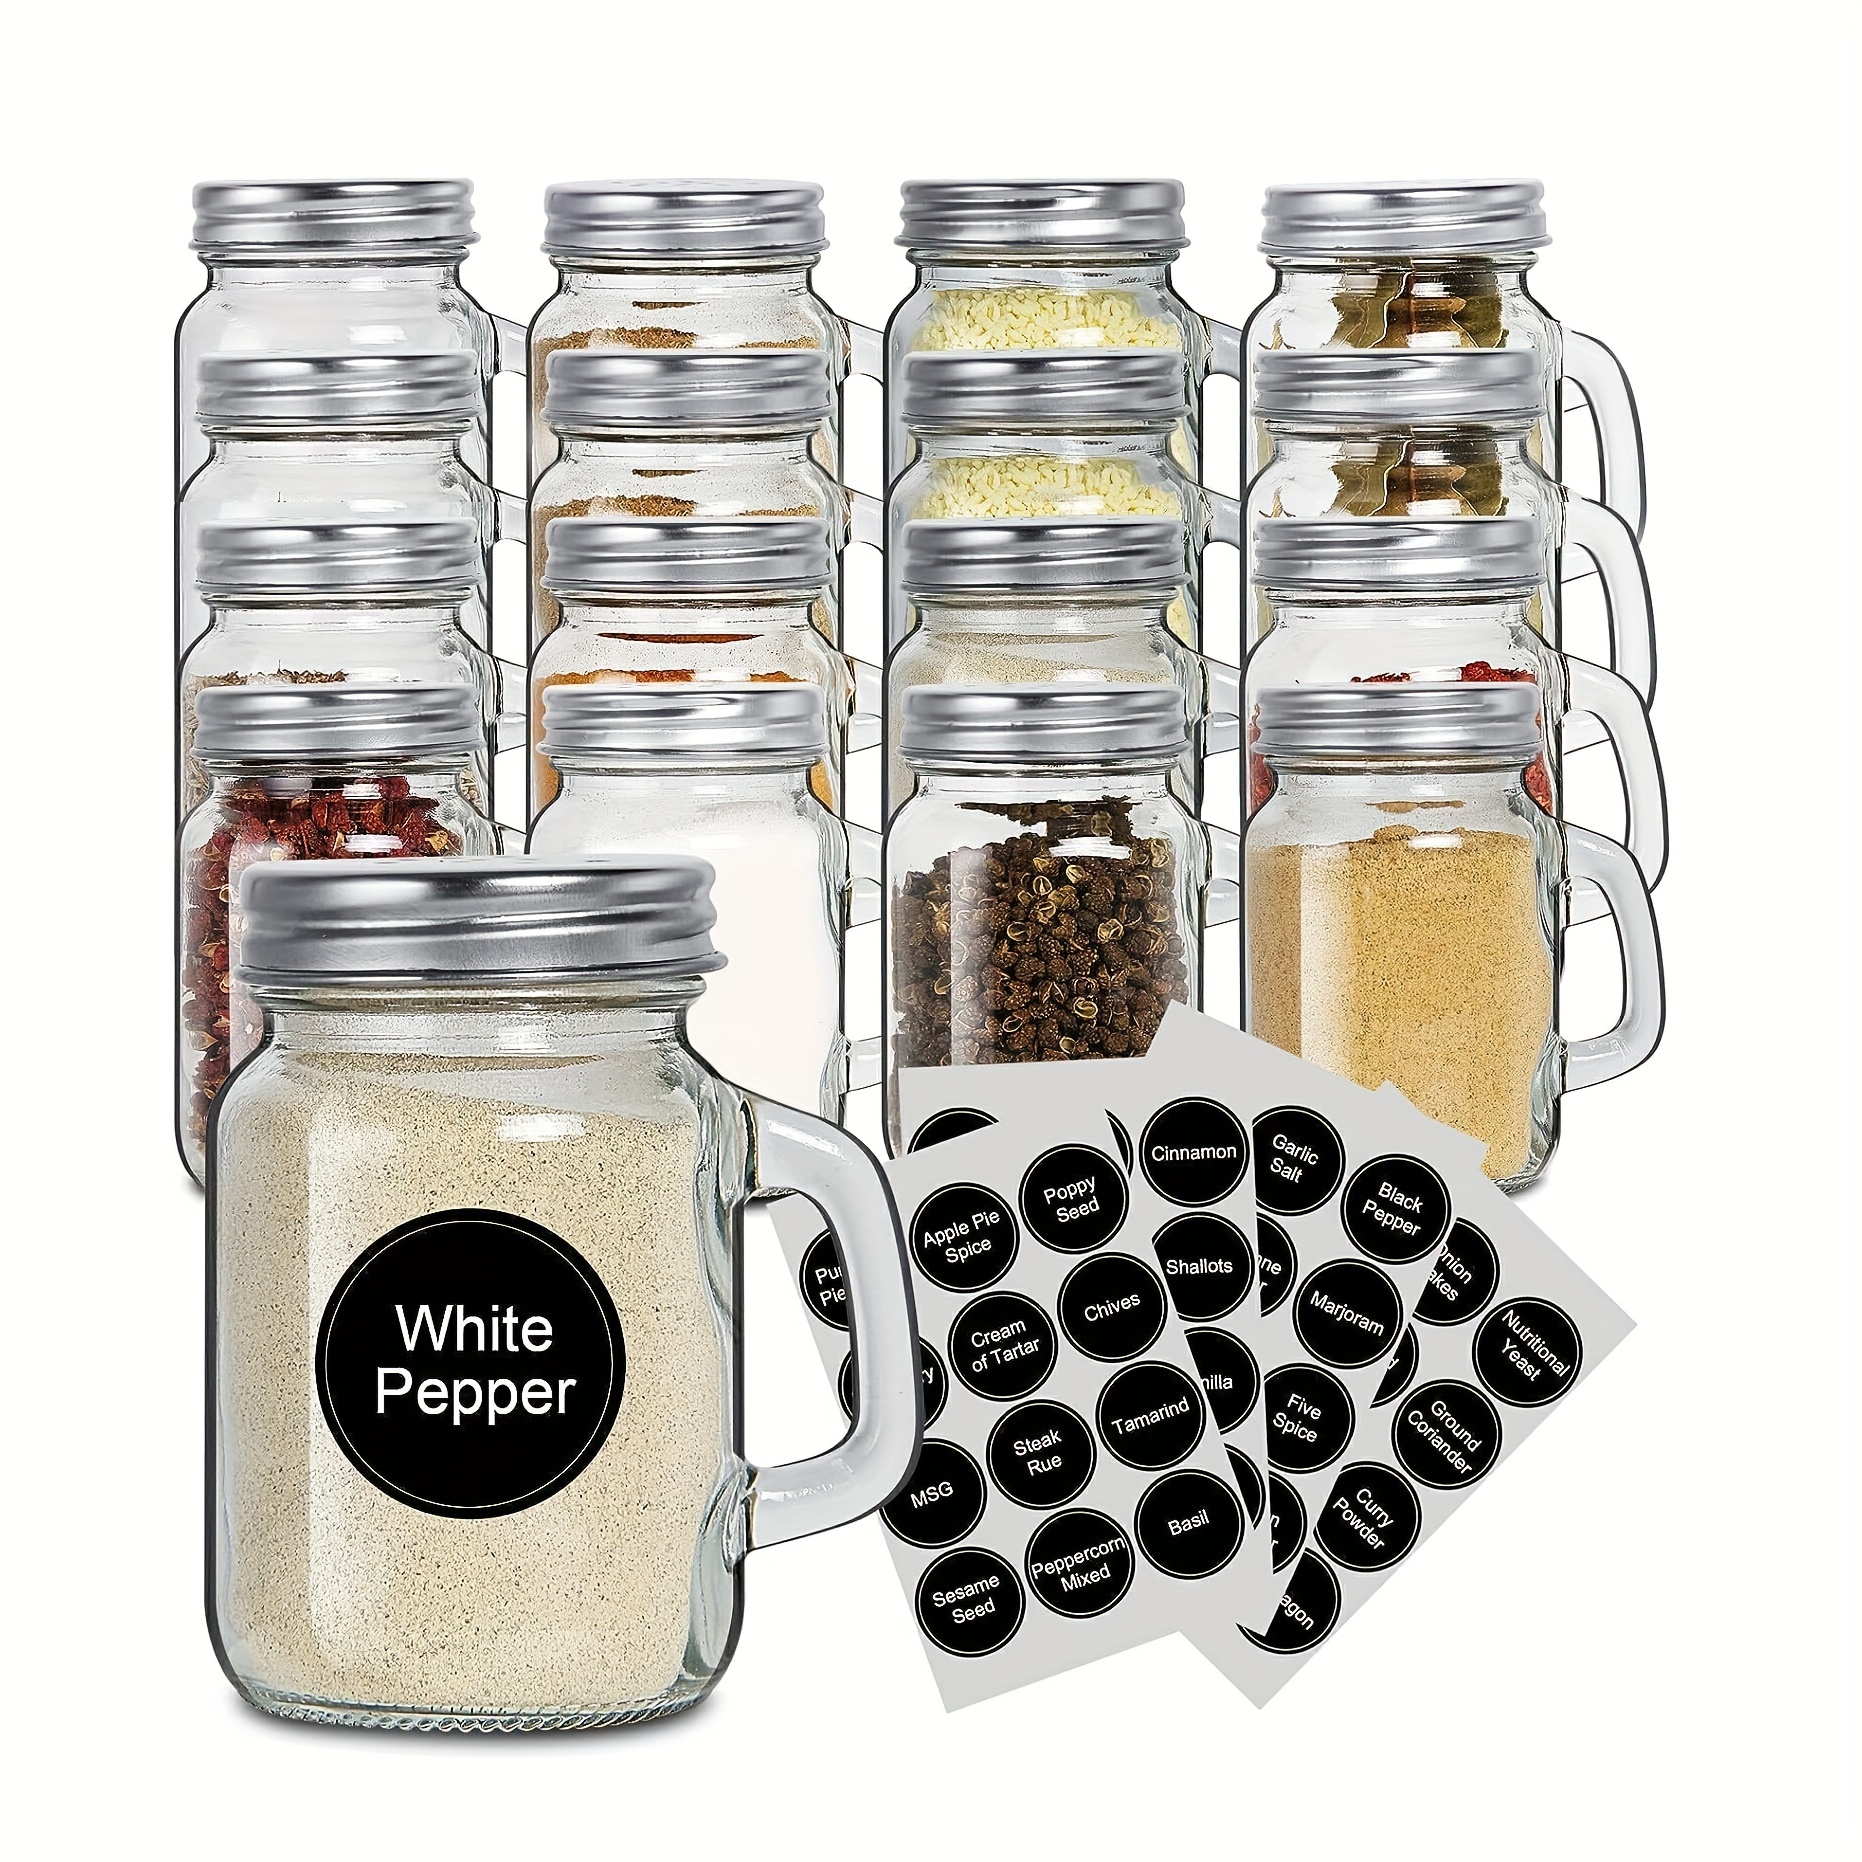 New! Spice Bottles Empty Glass with Labels 4 oz - 36 Piece Spice